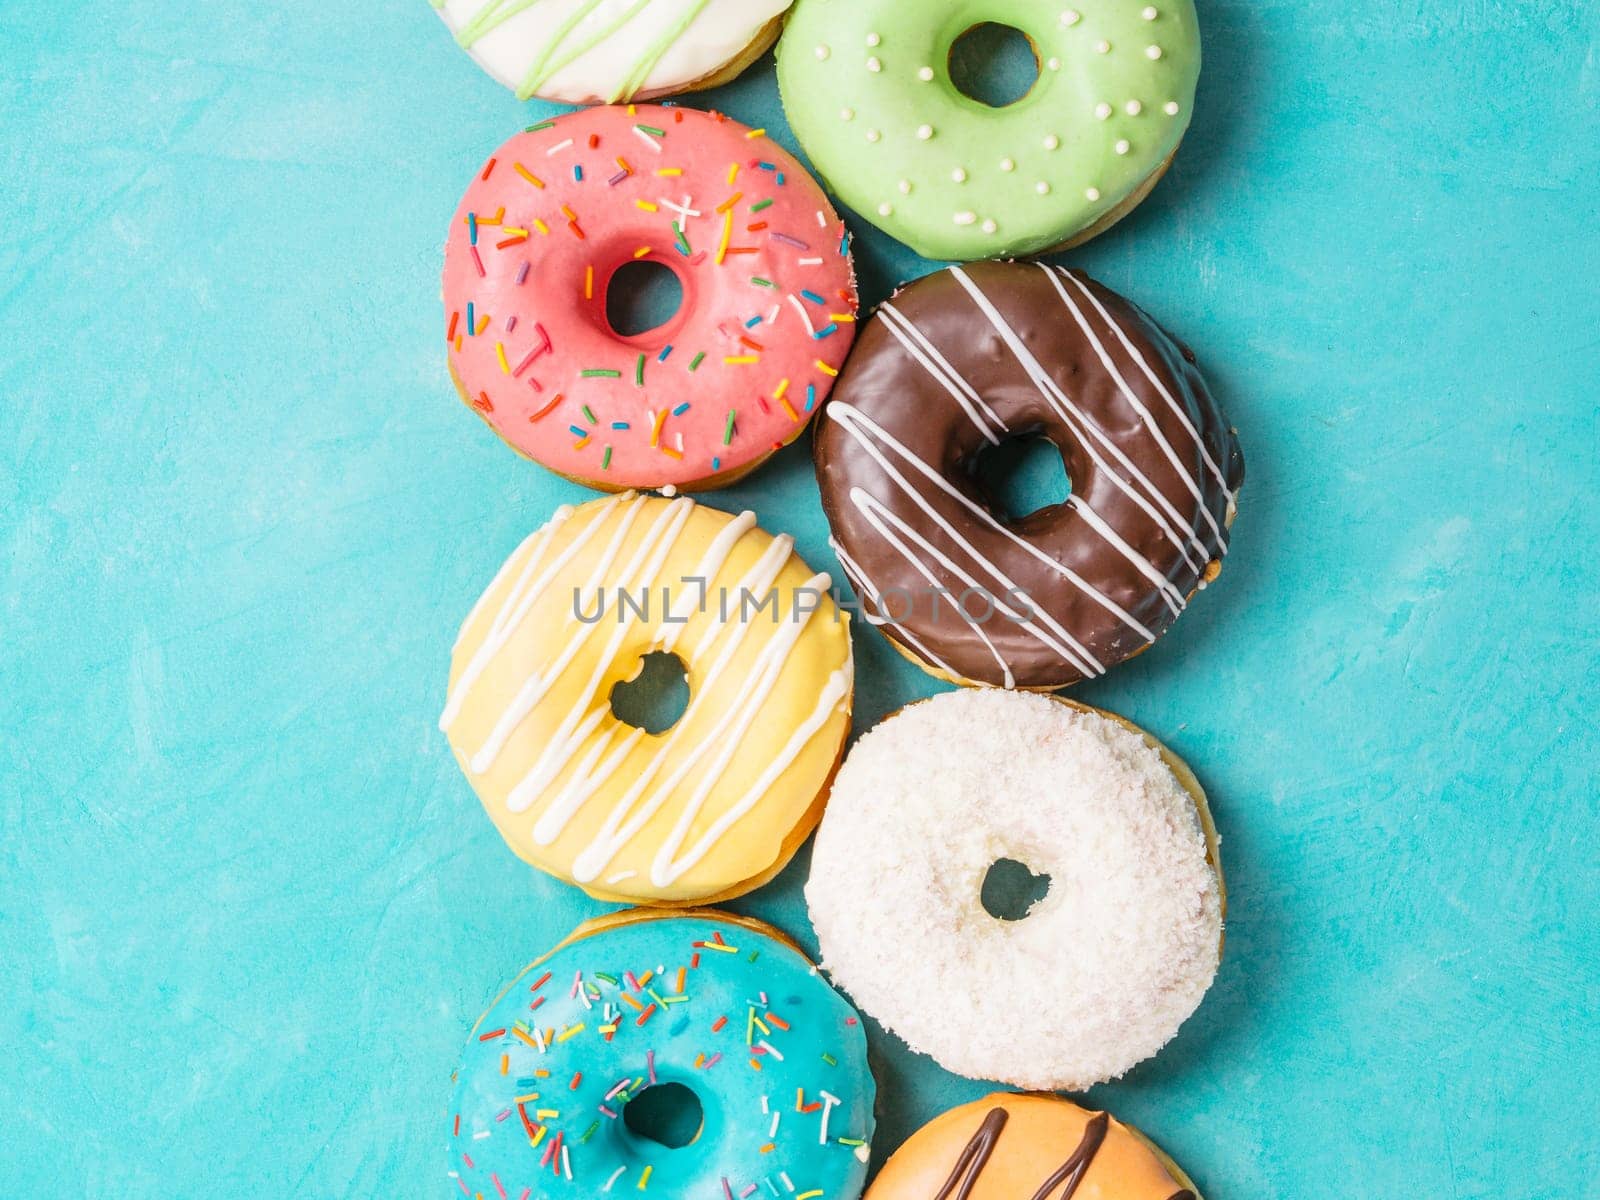 Top view of assorted donuts on blue concrete background. Colorful donuts background. Various glazed doughnuts with sprinkles.